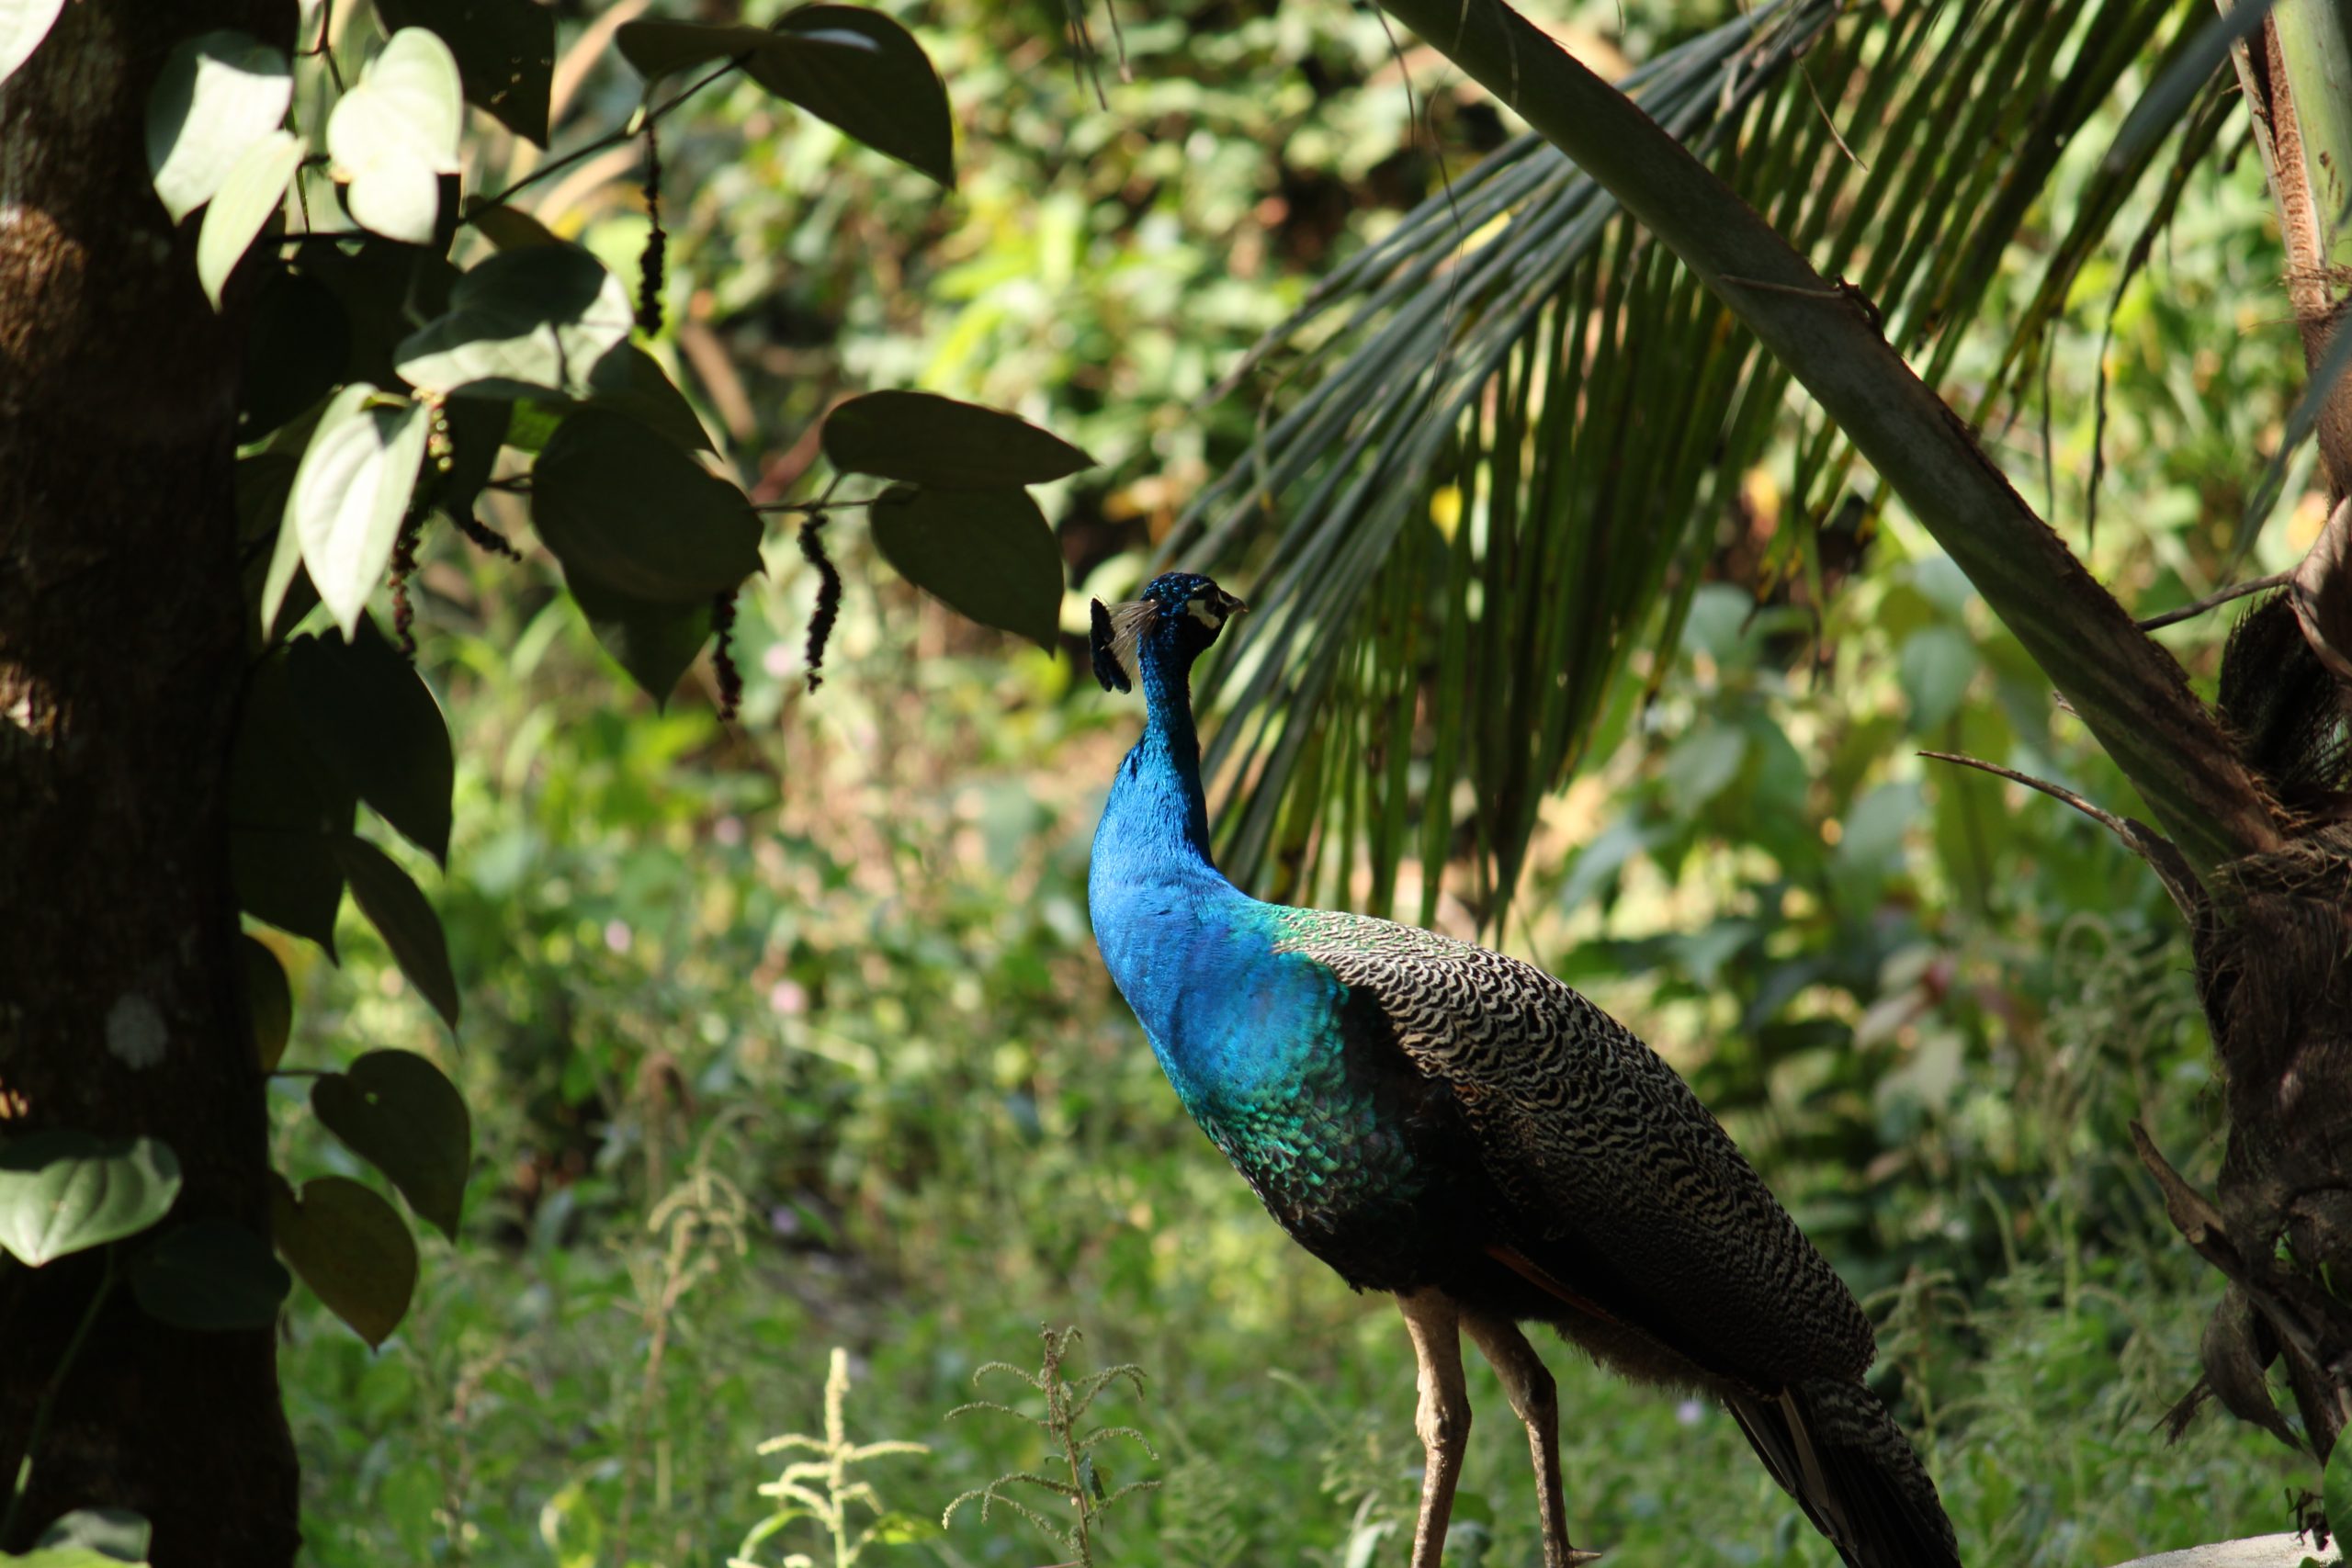 A peacock sitting in the forest